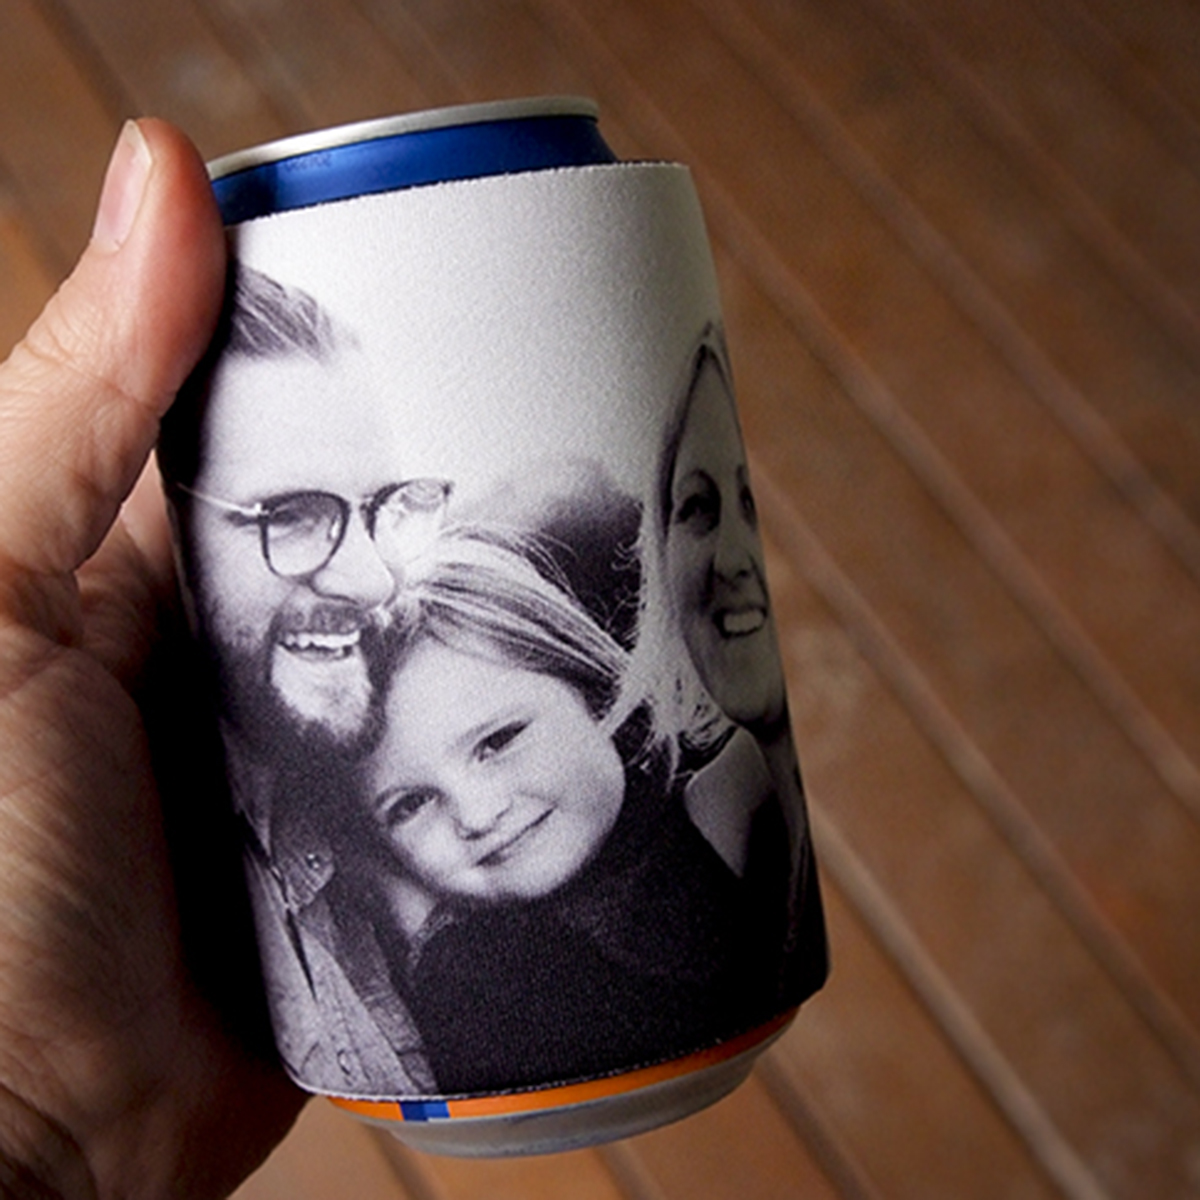 Black and white family photo printed onto a beer cooler